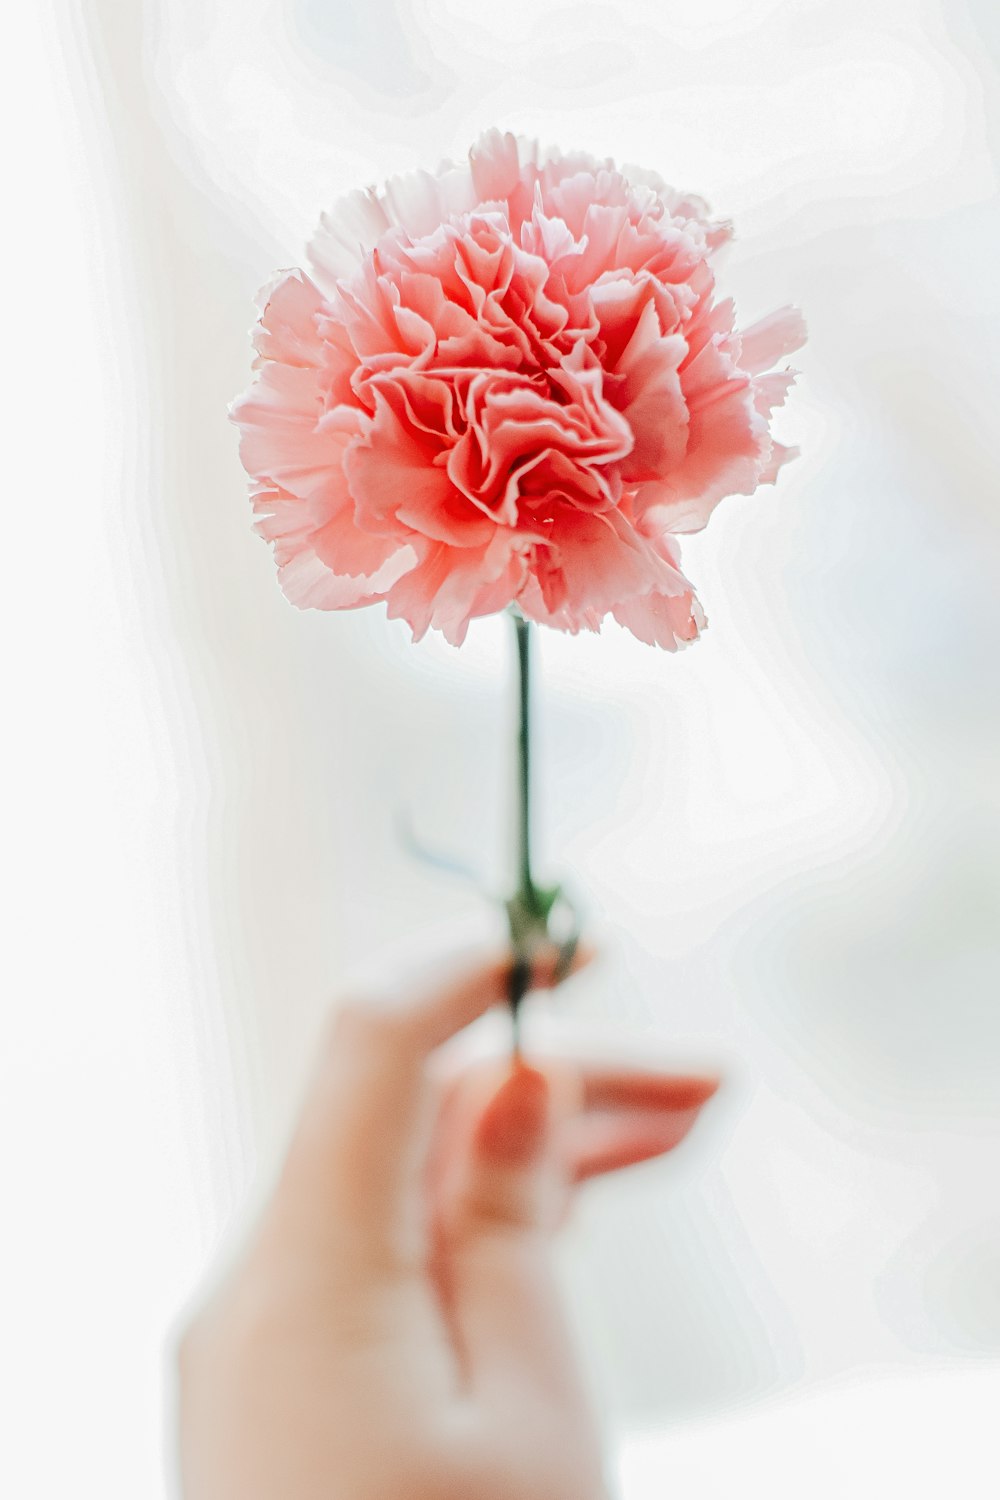 person holding pink rose in close up photography